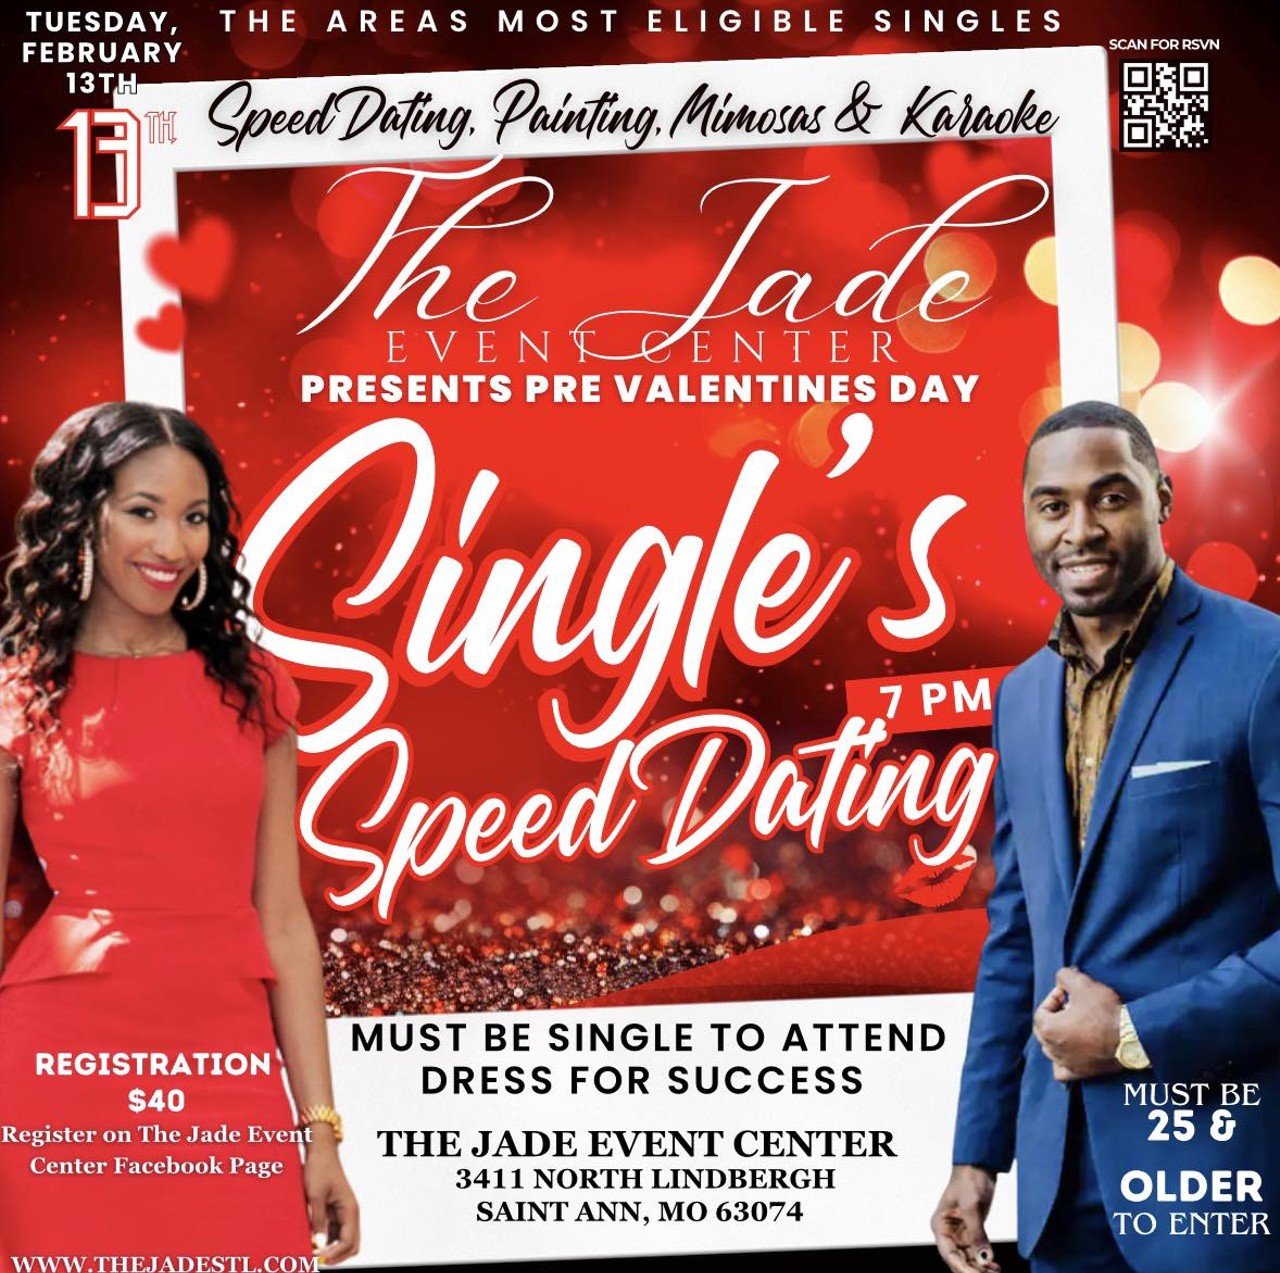 Speed Dating &amp; Karaoke
Single for Valentine&rsquo;s Day? Try speed dating and karaoke on Tuesday, February 13, at the Jade Event Center (3411 North Lindbergh Boulevard, St. Ann) to ignite a festive mood. Starting at 7 p.m. the area's most eligible singles will be participating in an evening of conversation, painting, mimosas and karaoke. Must be single and 25 or older to participate. Register on the Jade Event Center&rsquo;s Facebook page for $40.